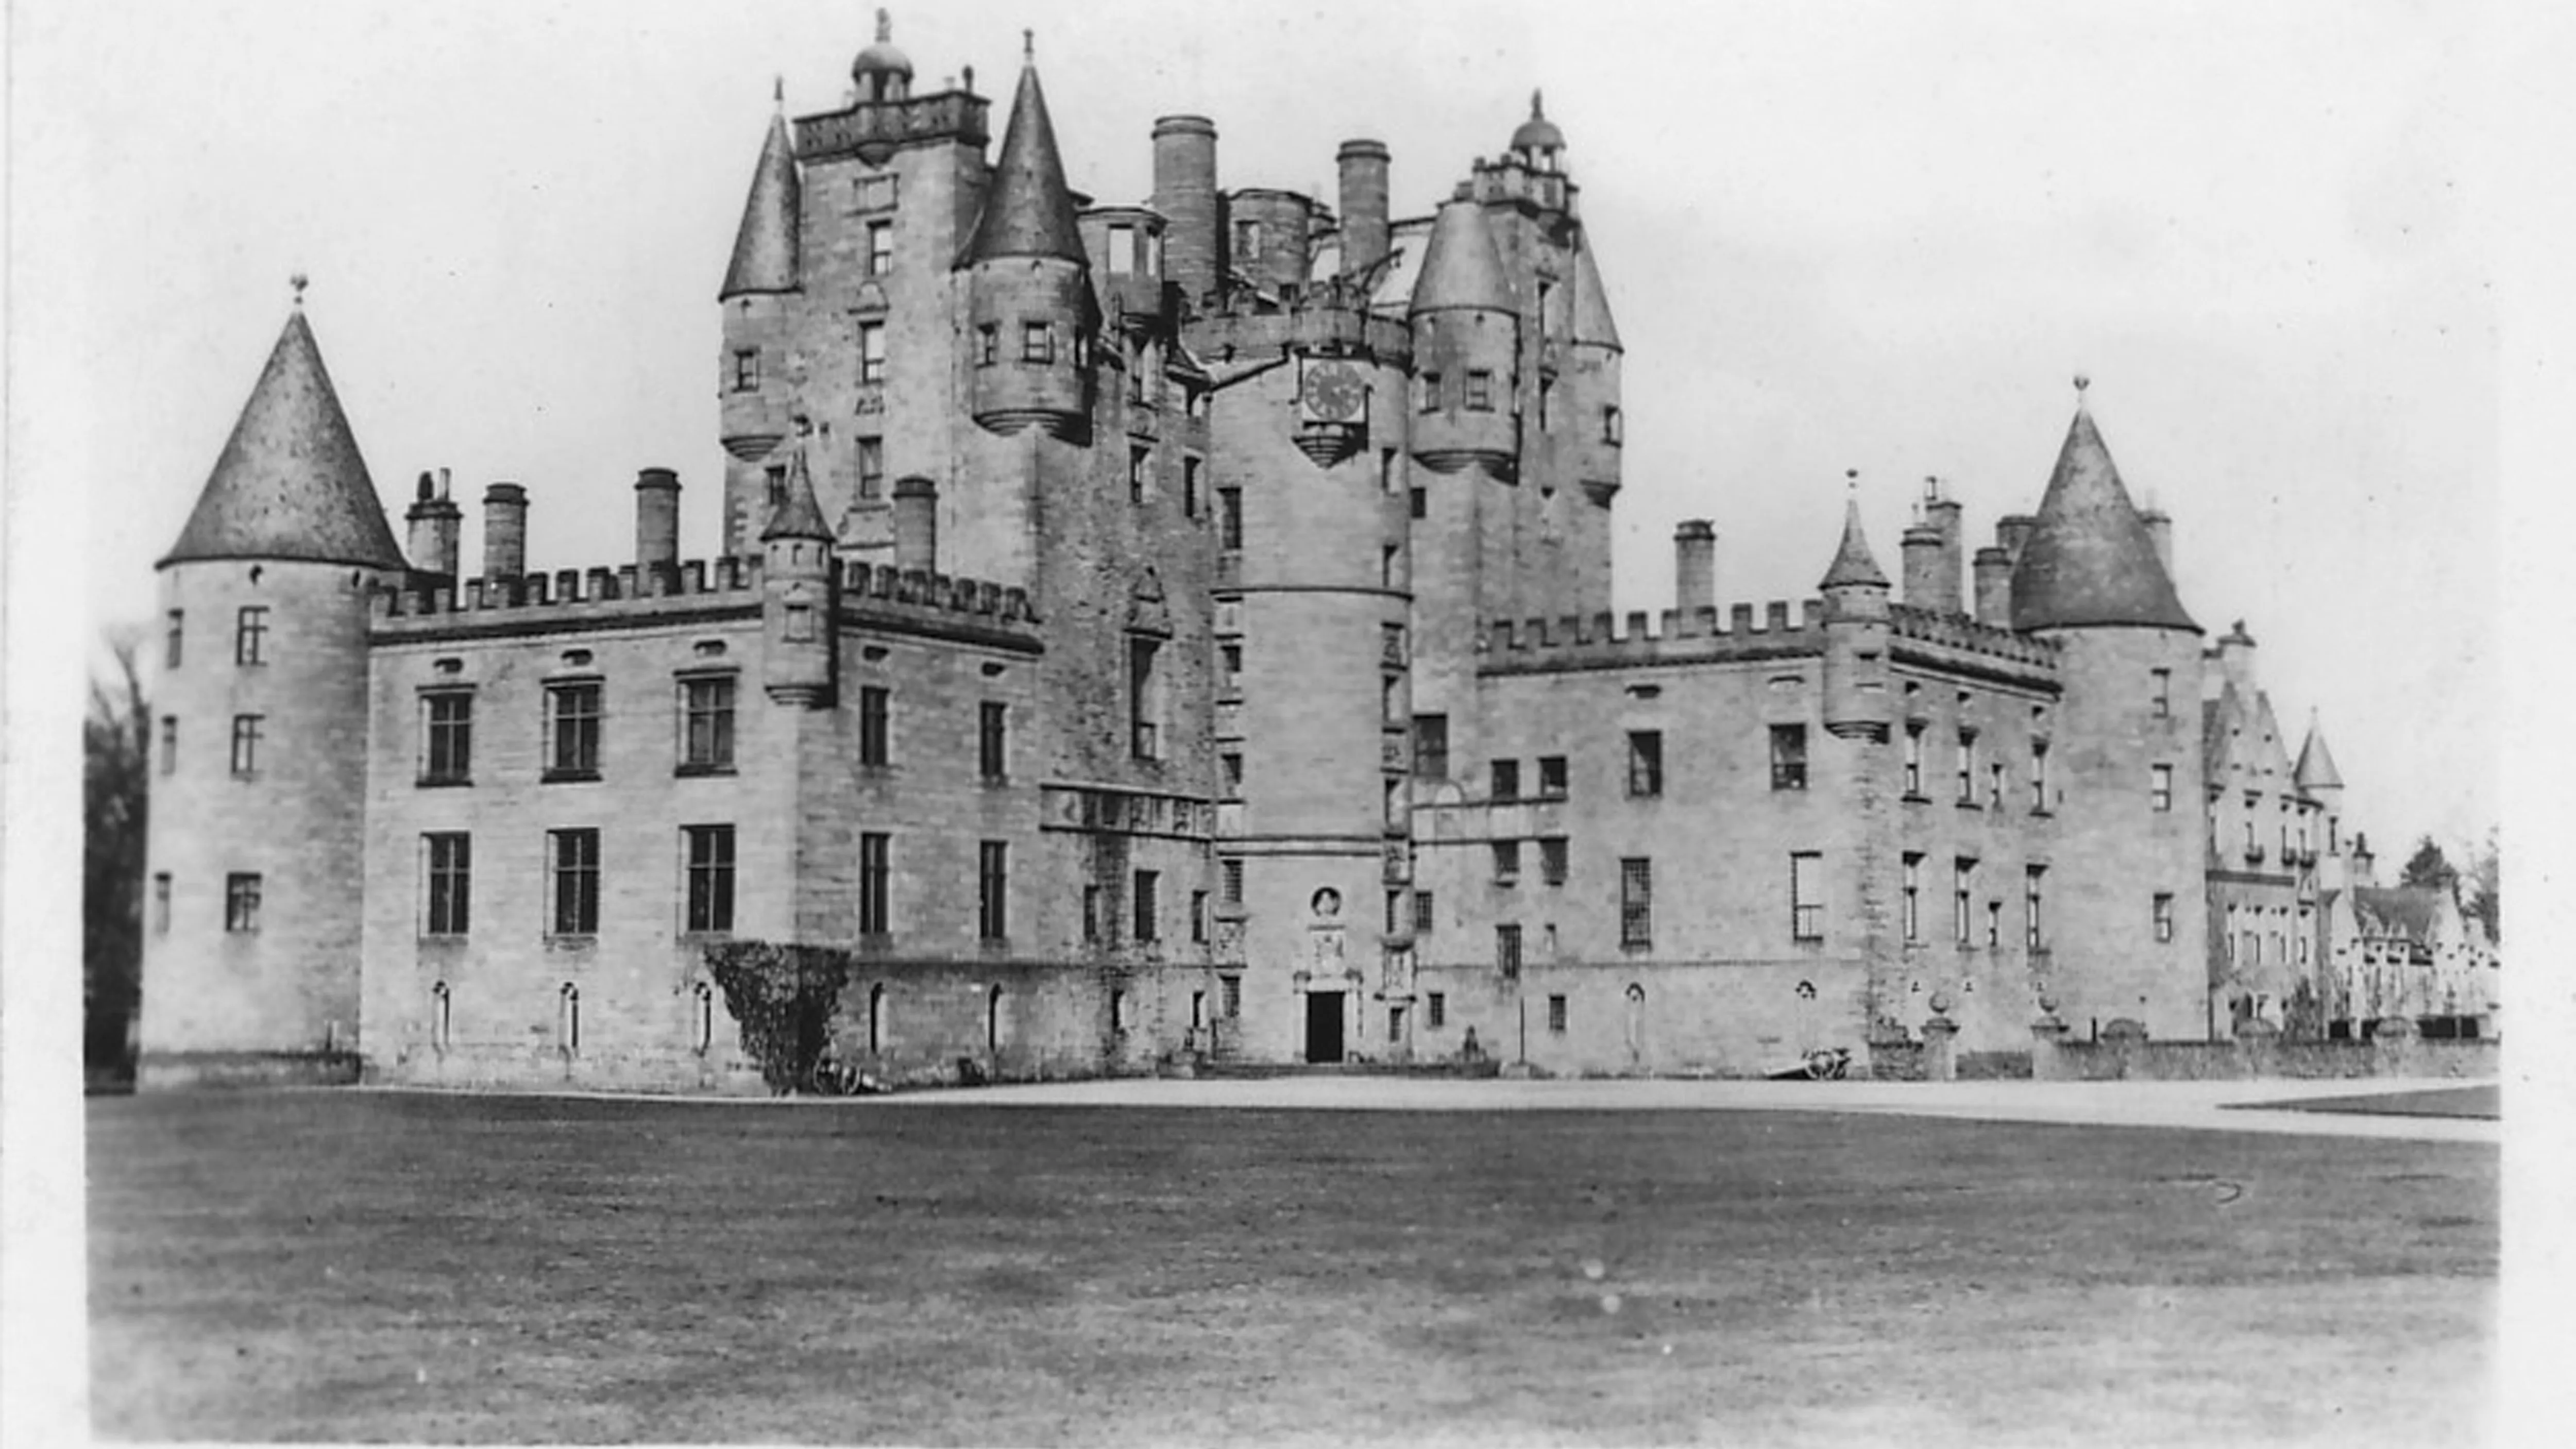 Glamis Castle, 1937. Glamis Castle was the home of the Lyon family since the 14th century, though the present building dates largely from the 17th century. Glamis was the childhood home of Queen Elizabeth The Queen Mother, wife of King George VI. Card No 48 of 48 from Coronation Souvenir cigarette cards produced for Tournament Cigarettes. [RJ Lea Ltd, Manchester, 1937] (Photo by The Print Collector/Getty Images)